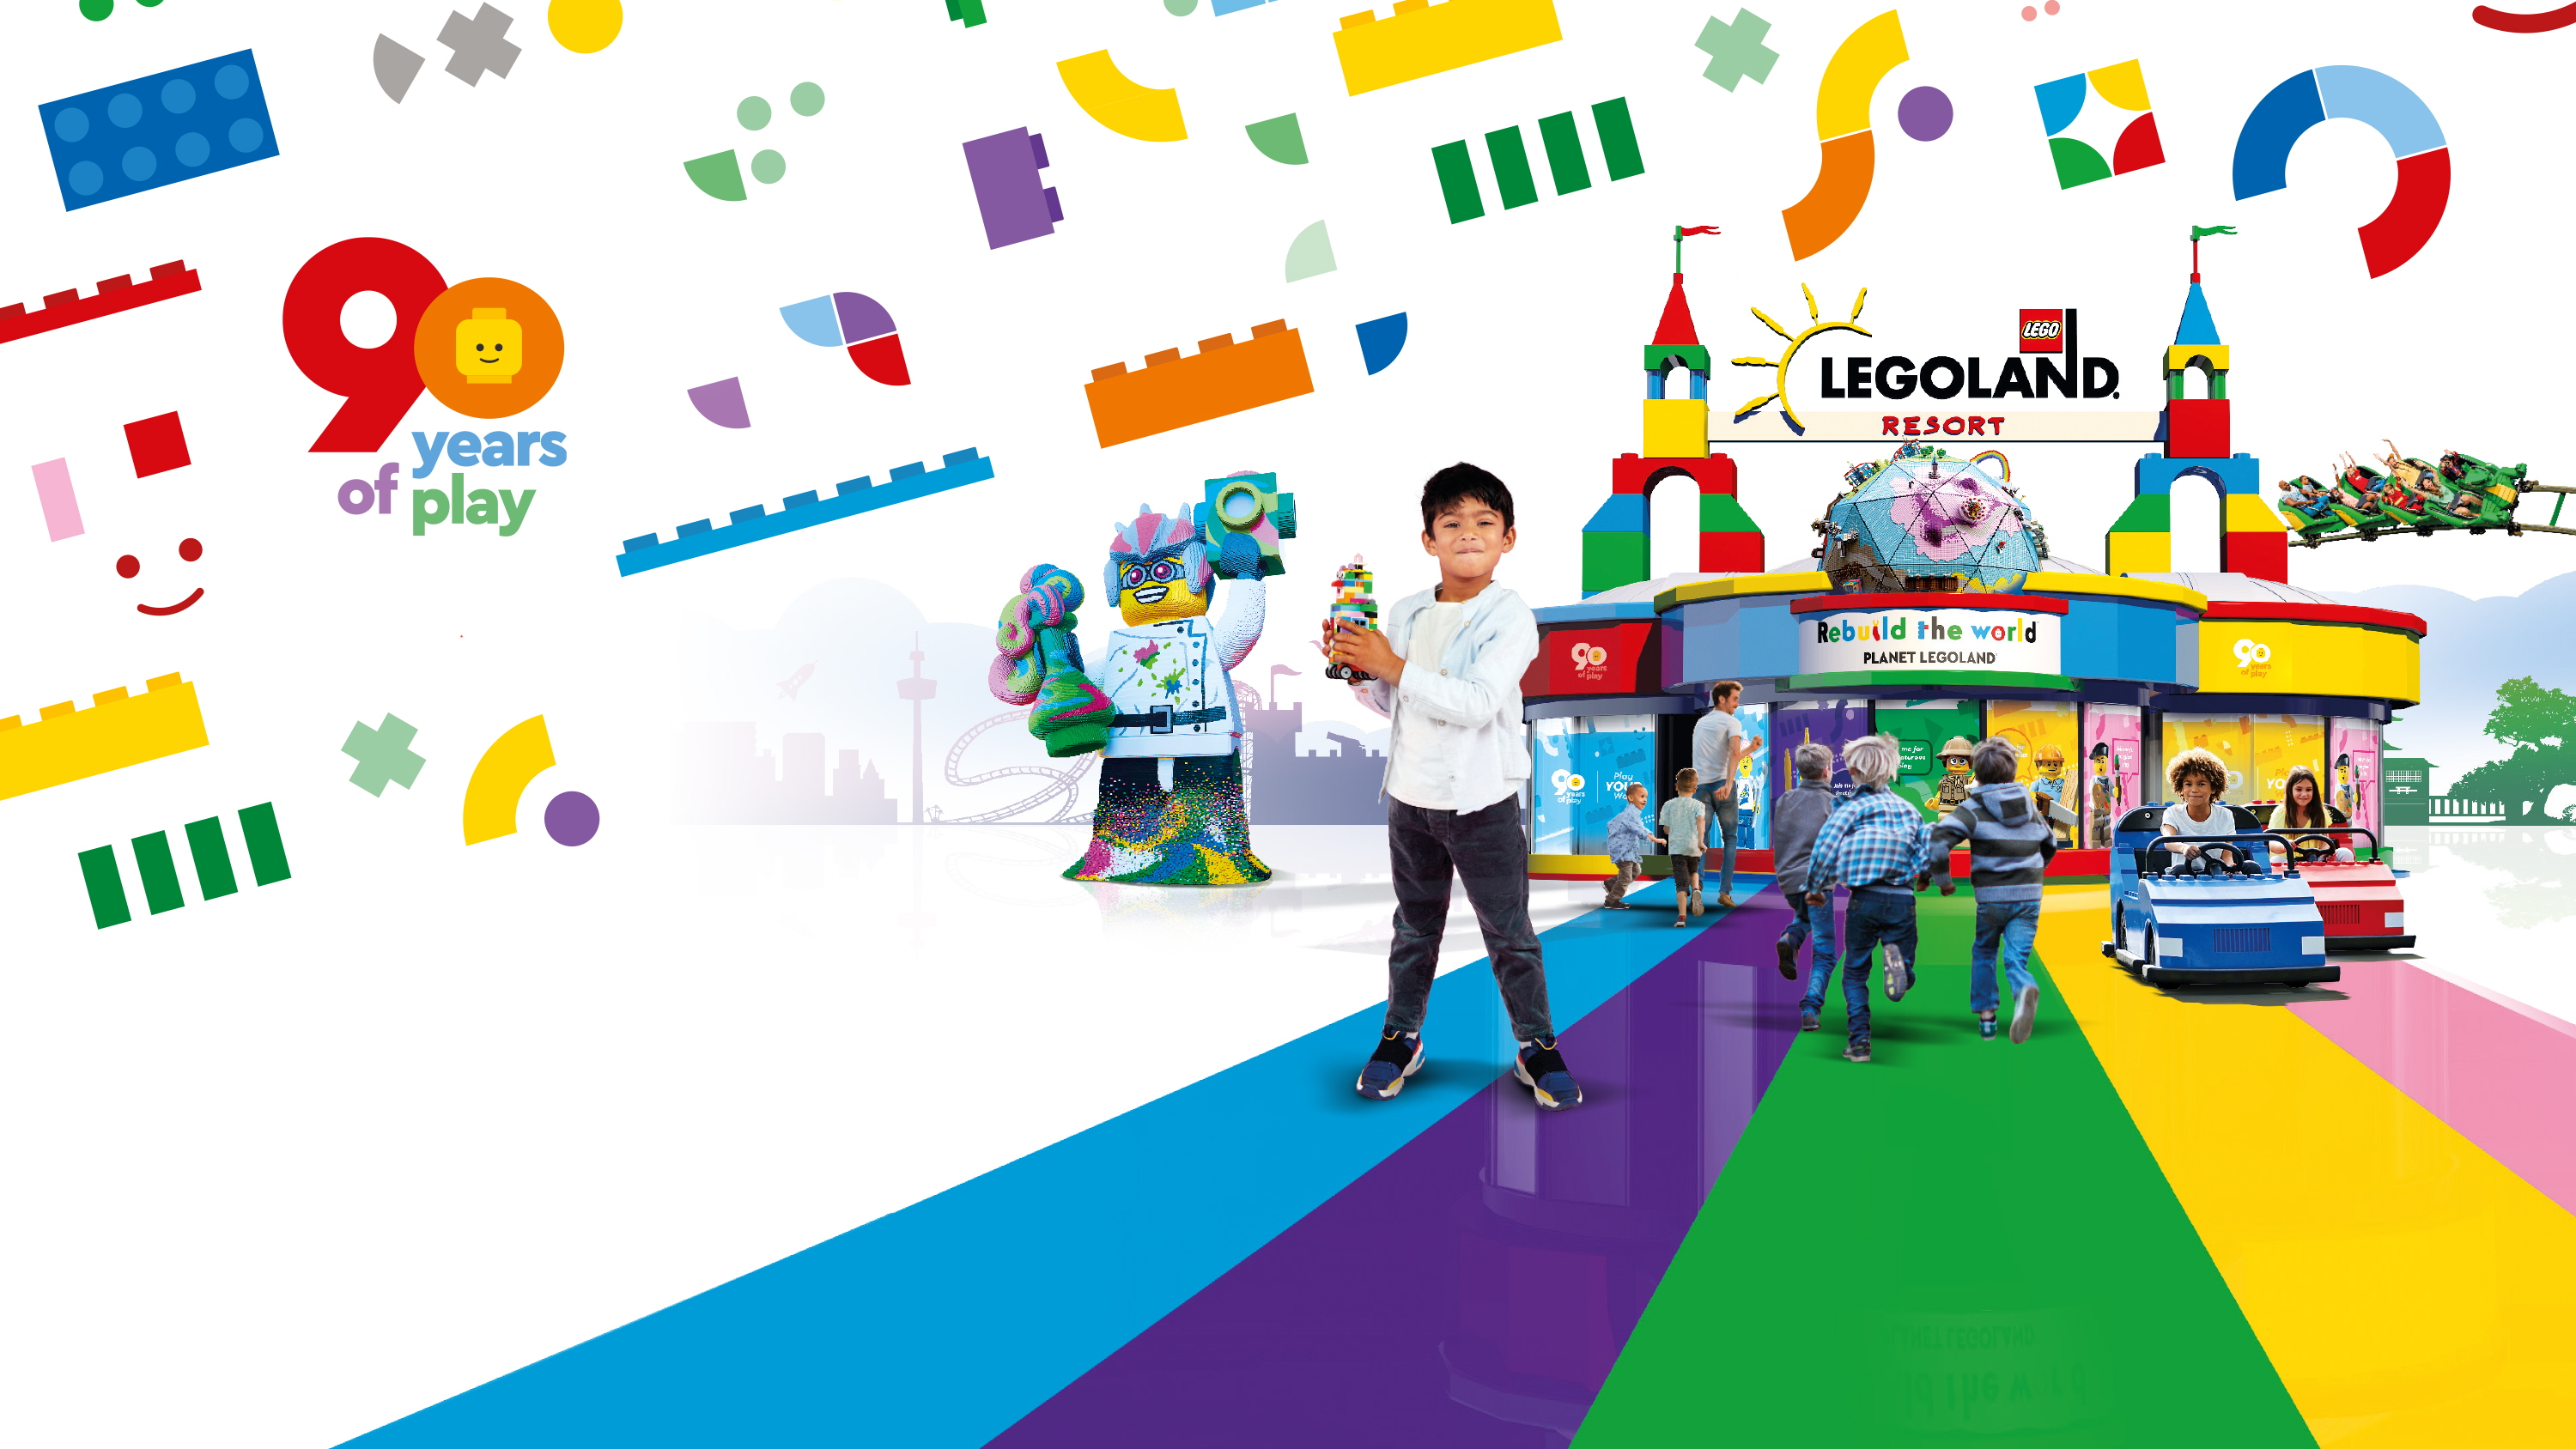 Celebrate 90 Years of Play at LEGOLAND Florida with our new Play Your Way attraction.